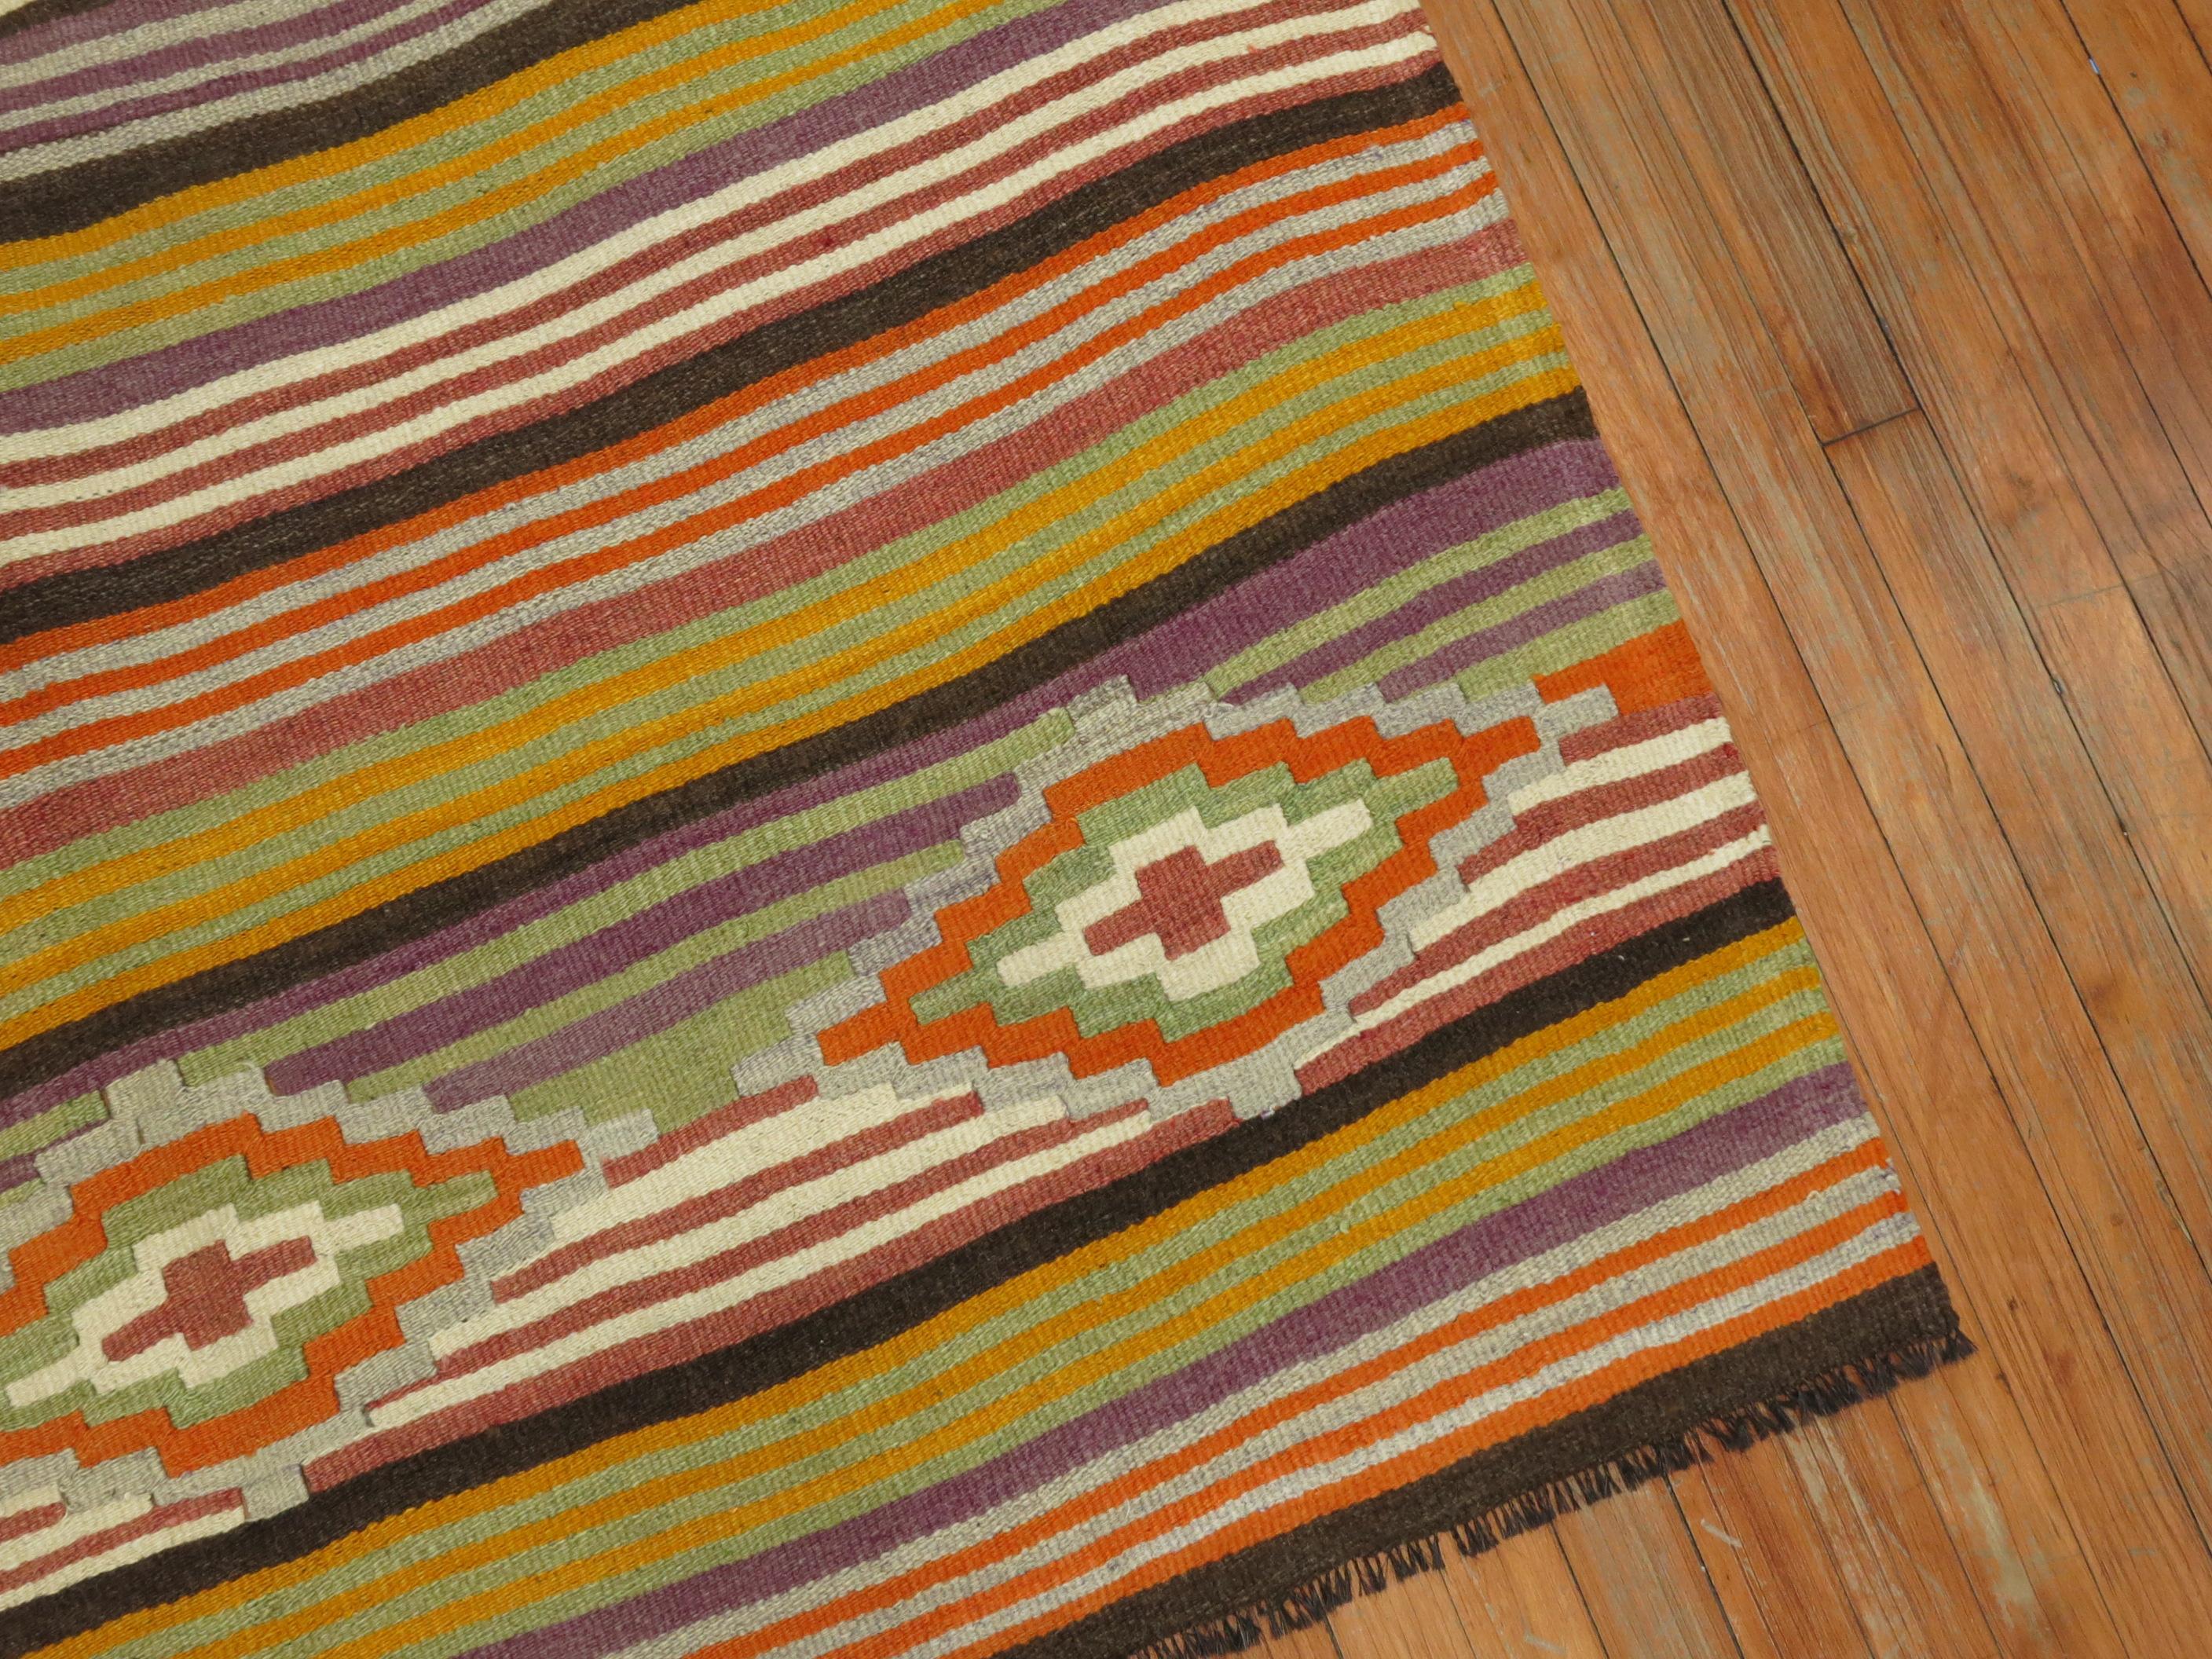 An intermediate size vintage Turkish Kilim with a colorful striped design throughout.